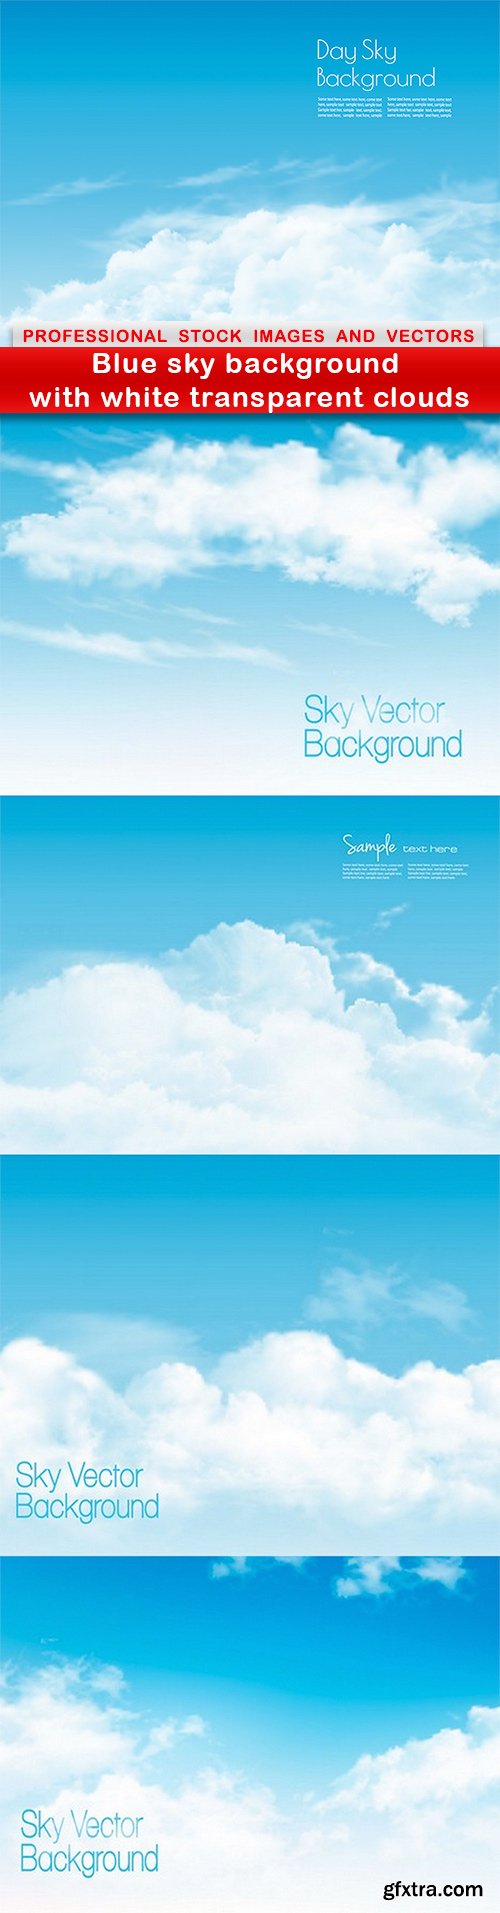 Blue sky background with white transparent clouds - 5 EPS